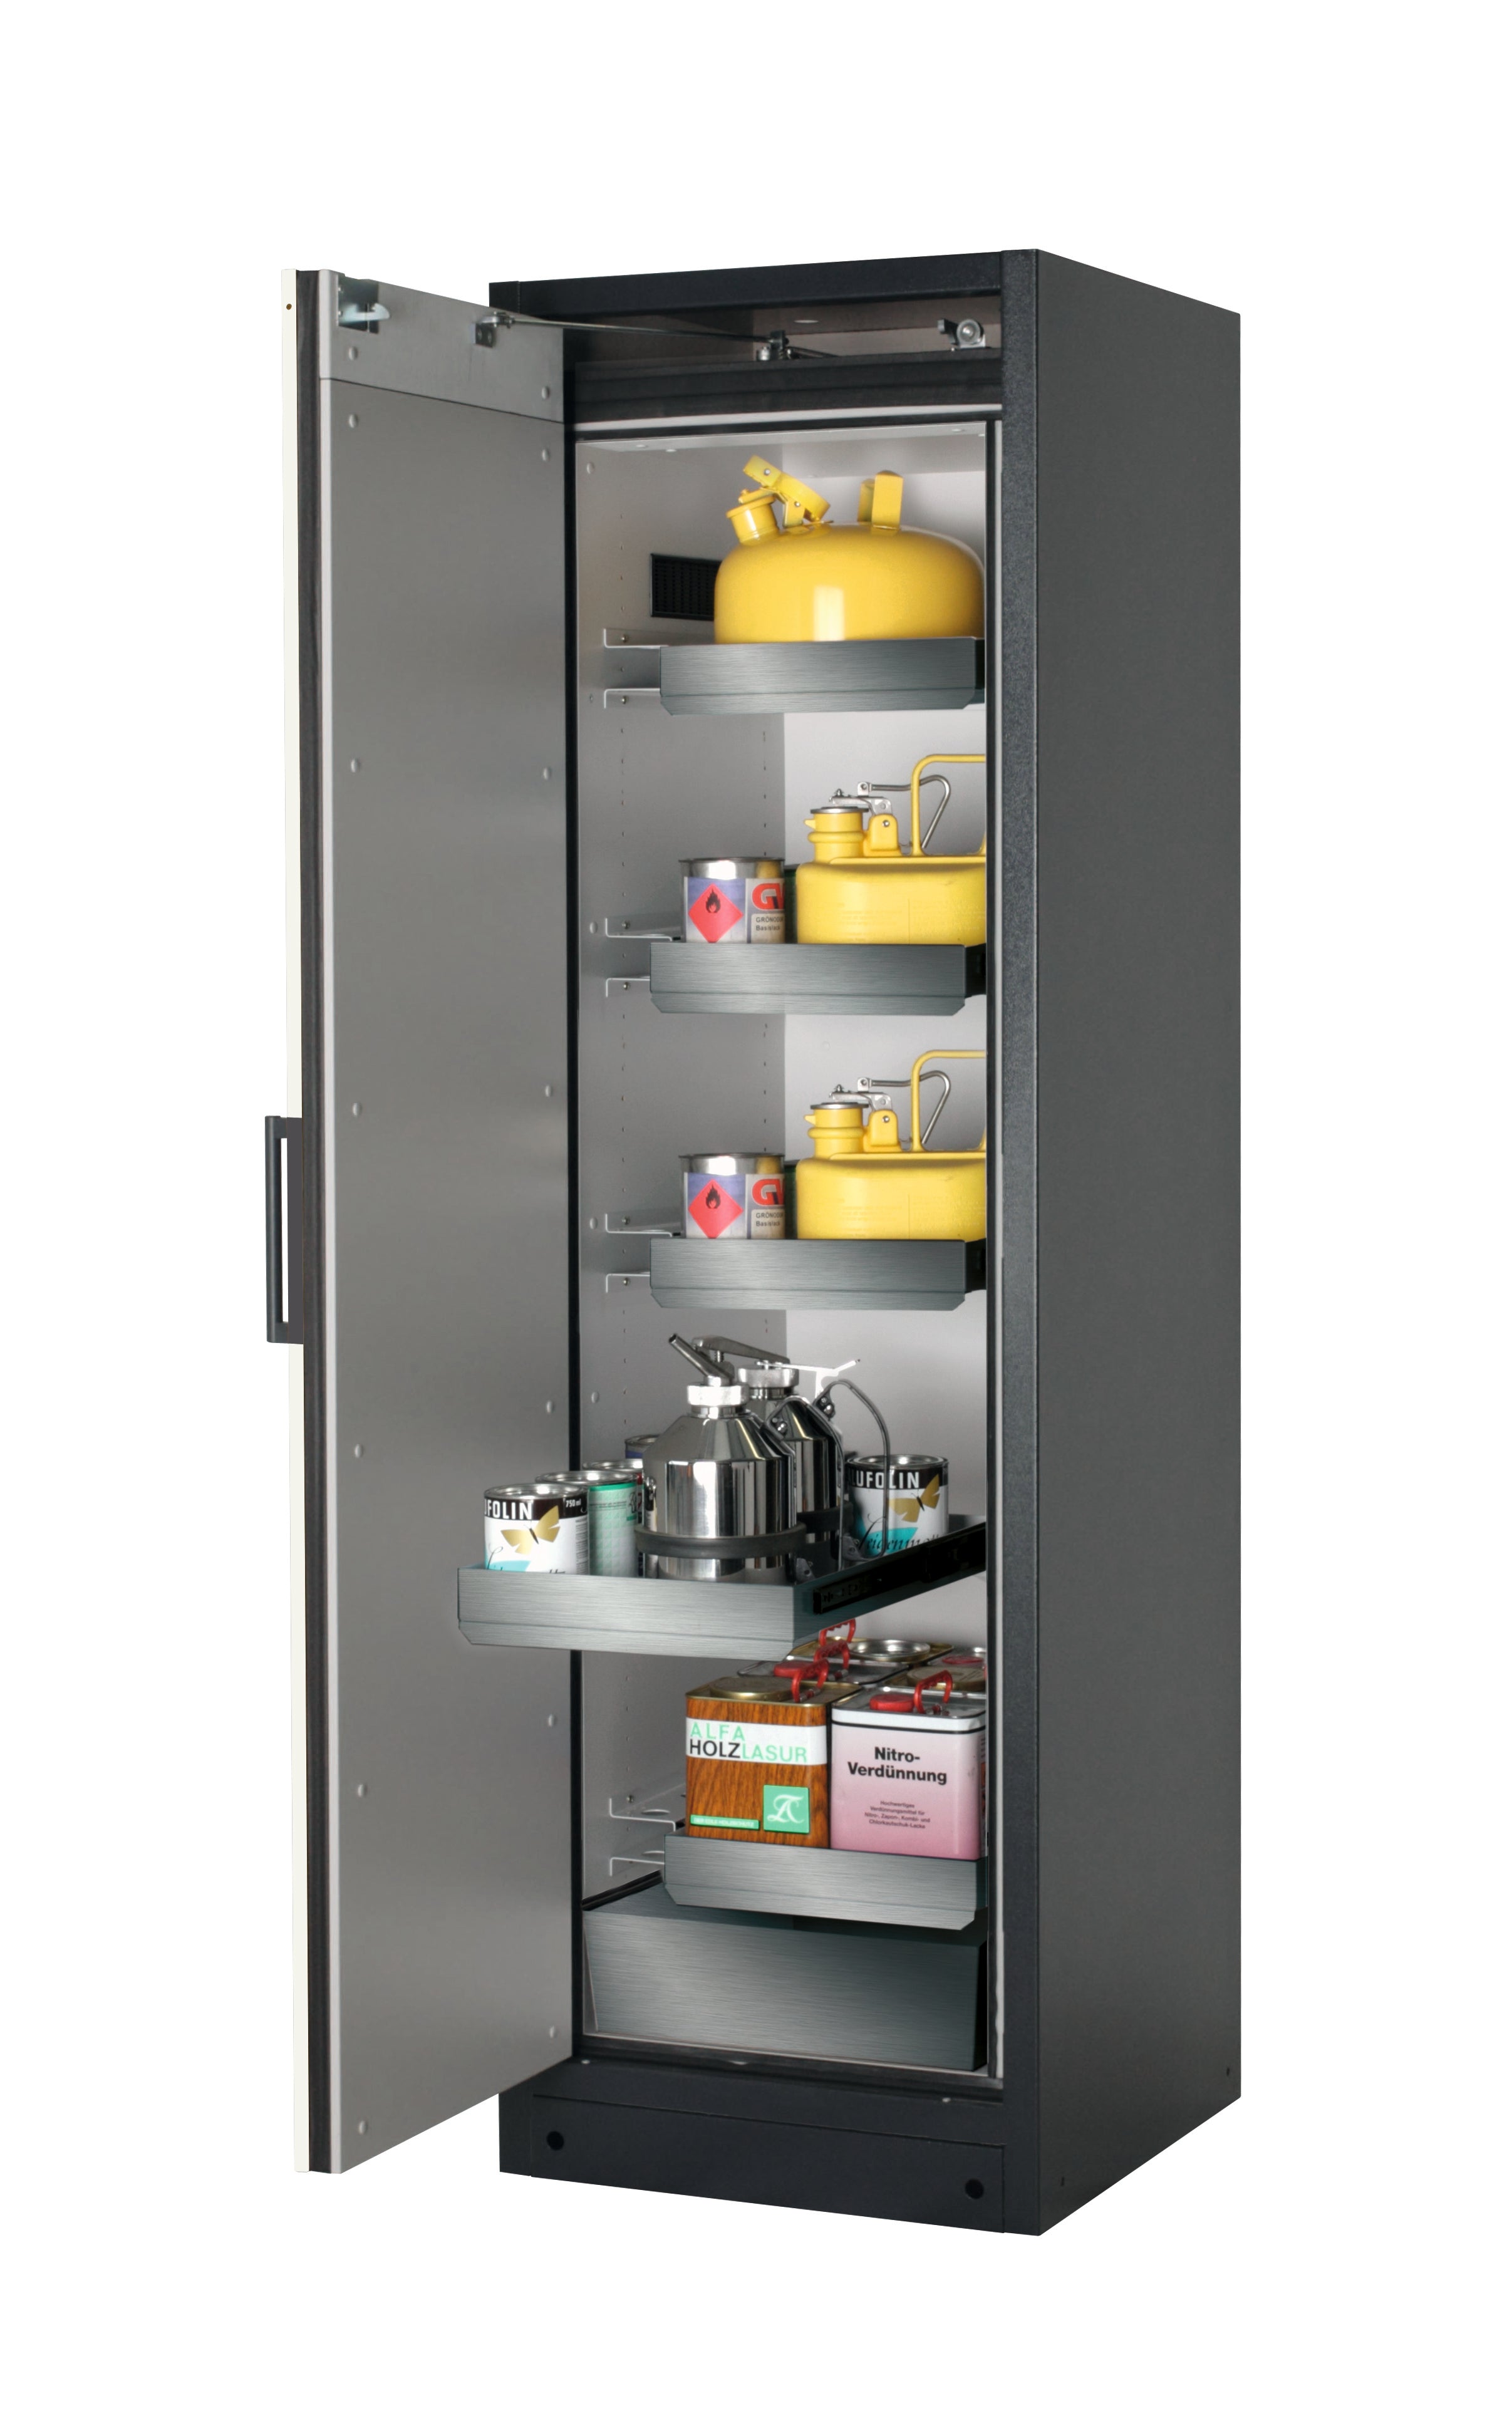 Type 90 safety storage cabinet Q-CLASSIC-90 model Q90.195.060 in asecos silver with 4x drawer (standard) (stainless steel 1.4301),